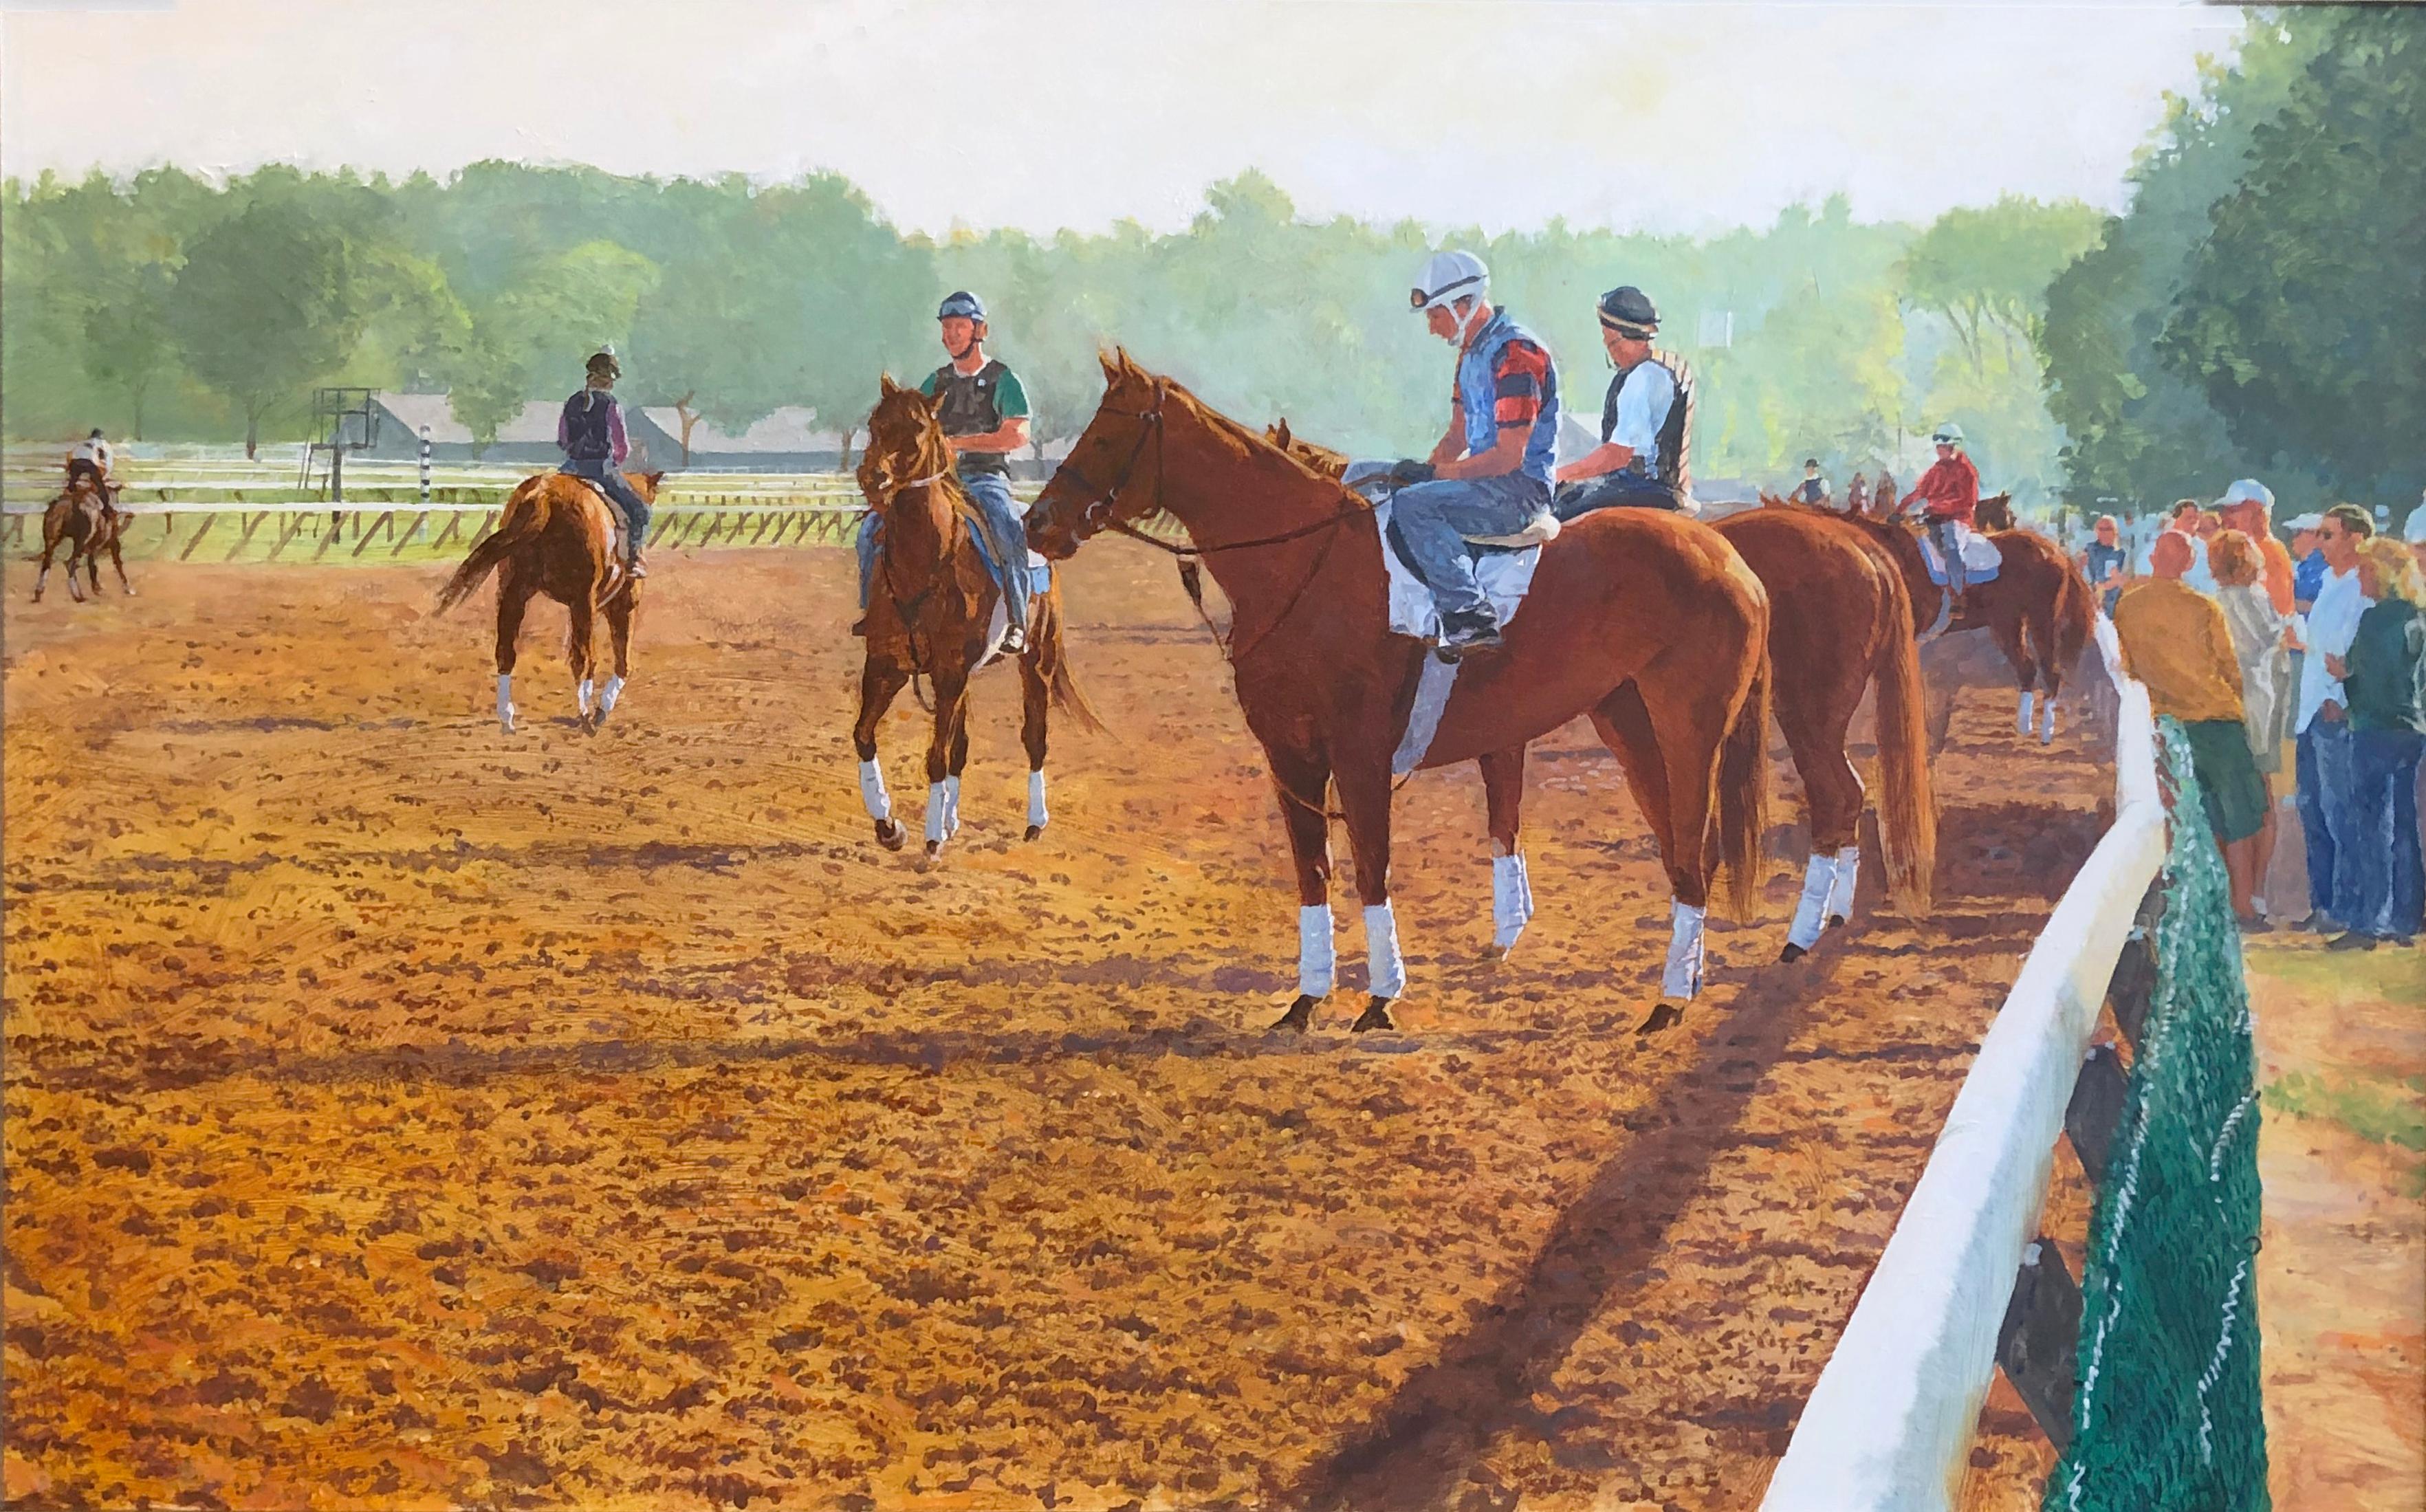 Dahl Taylor, "Waiting on the Track", 30x48 Equine Oil Painting on Canvas